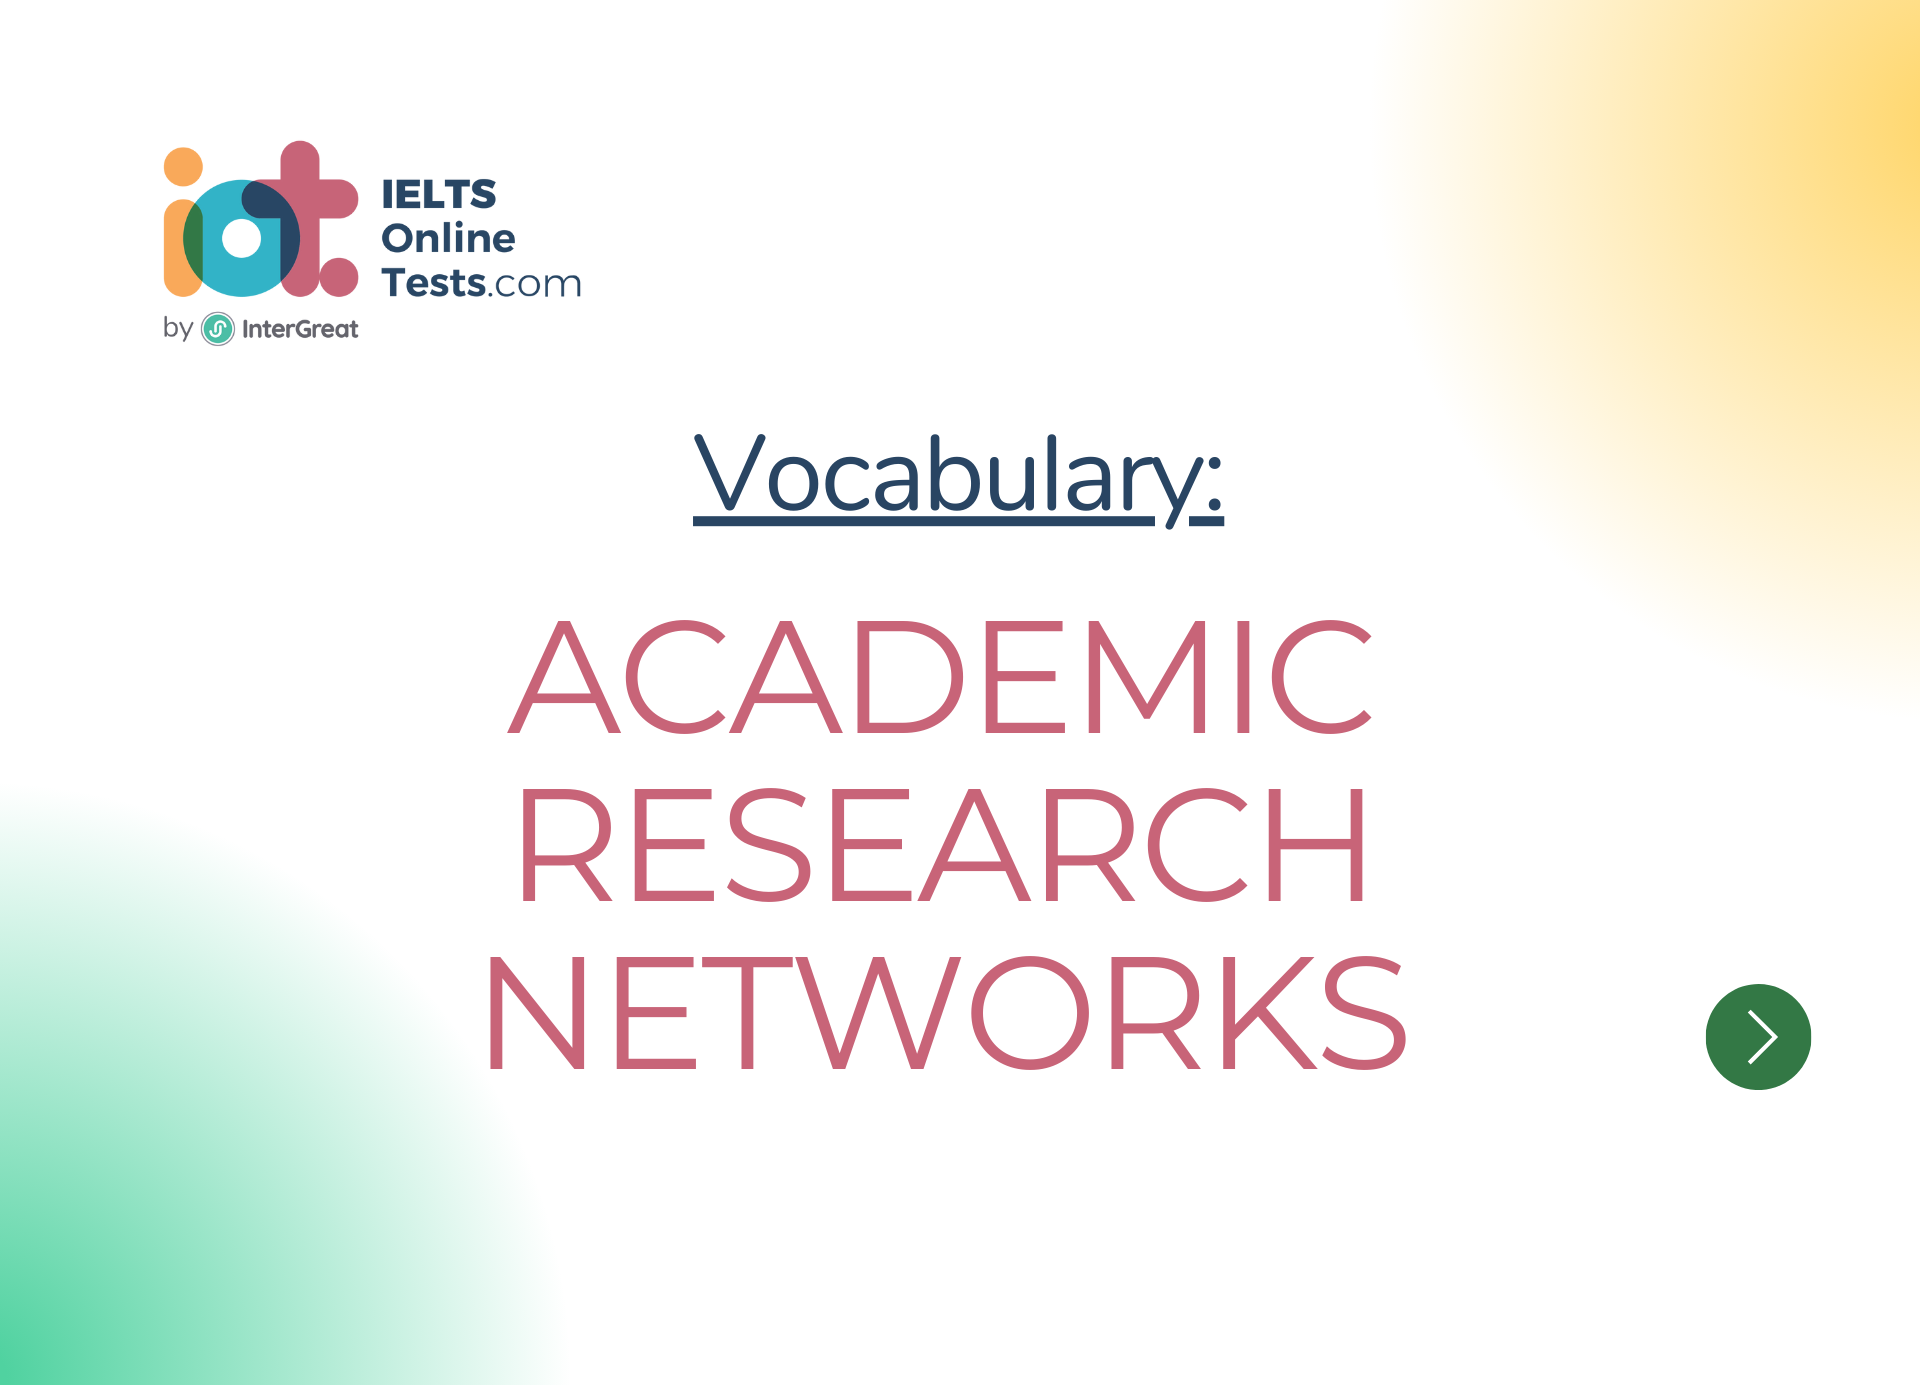 Academic research networks